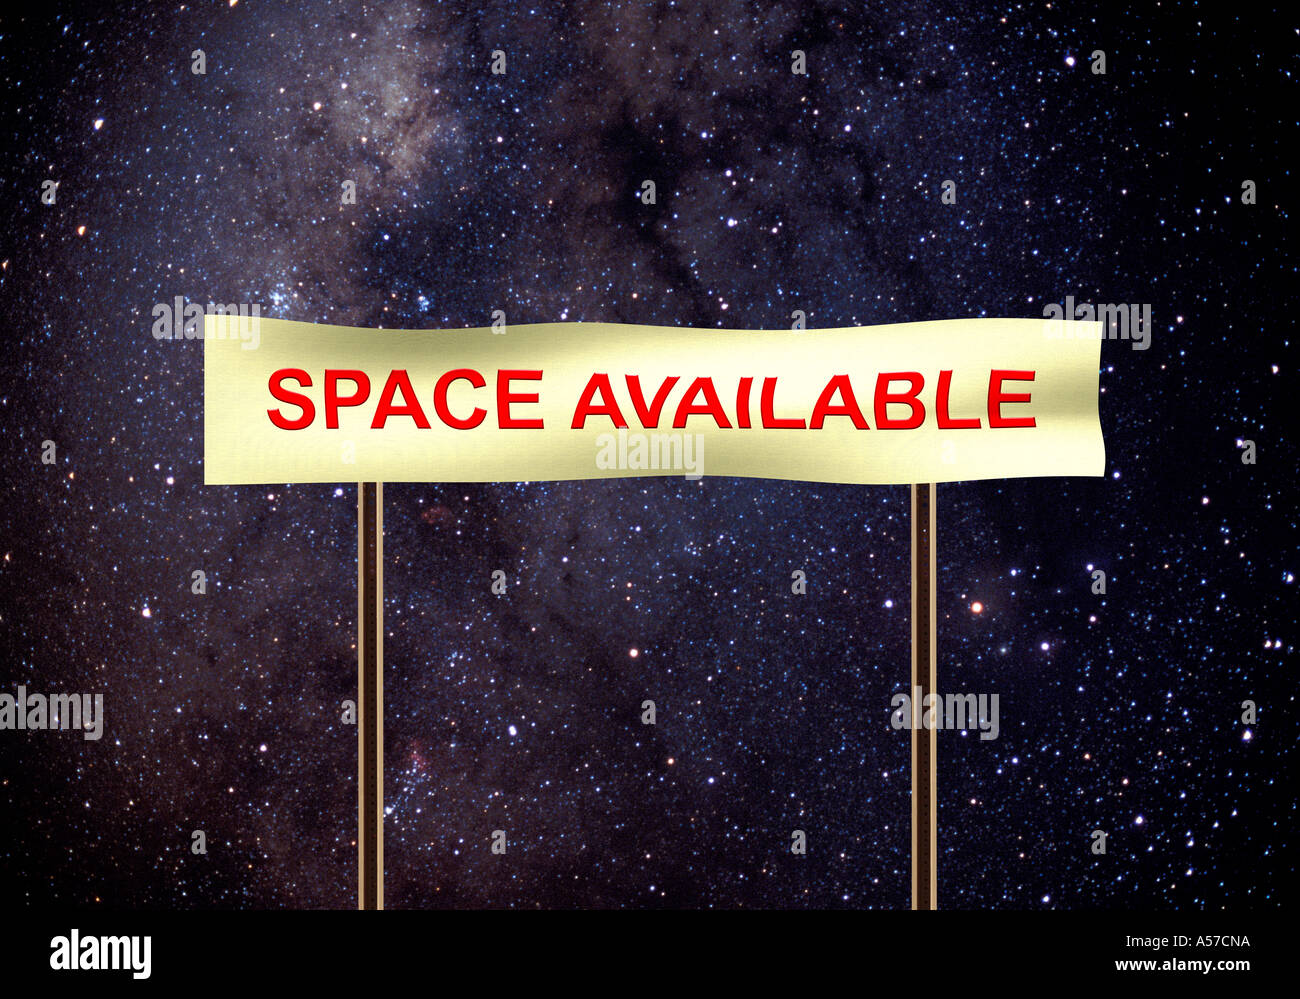 Space Available. Stock Photo